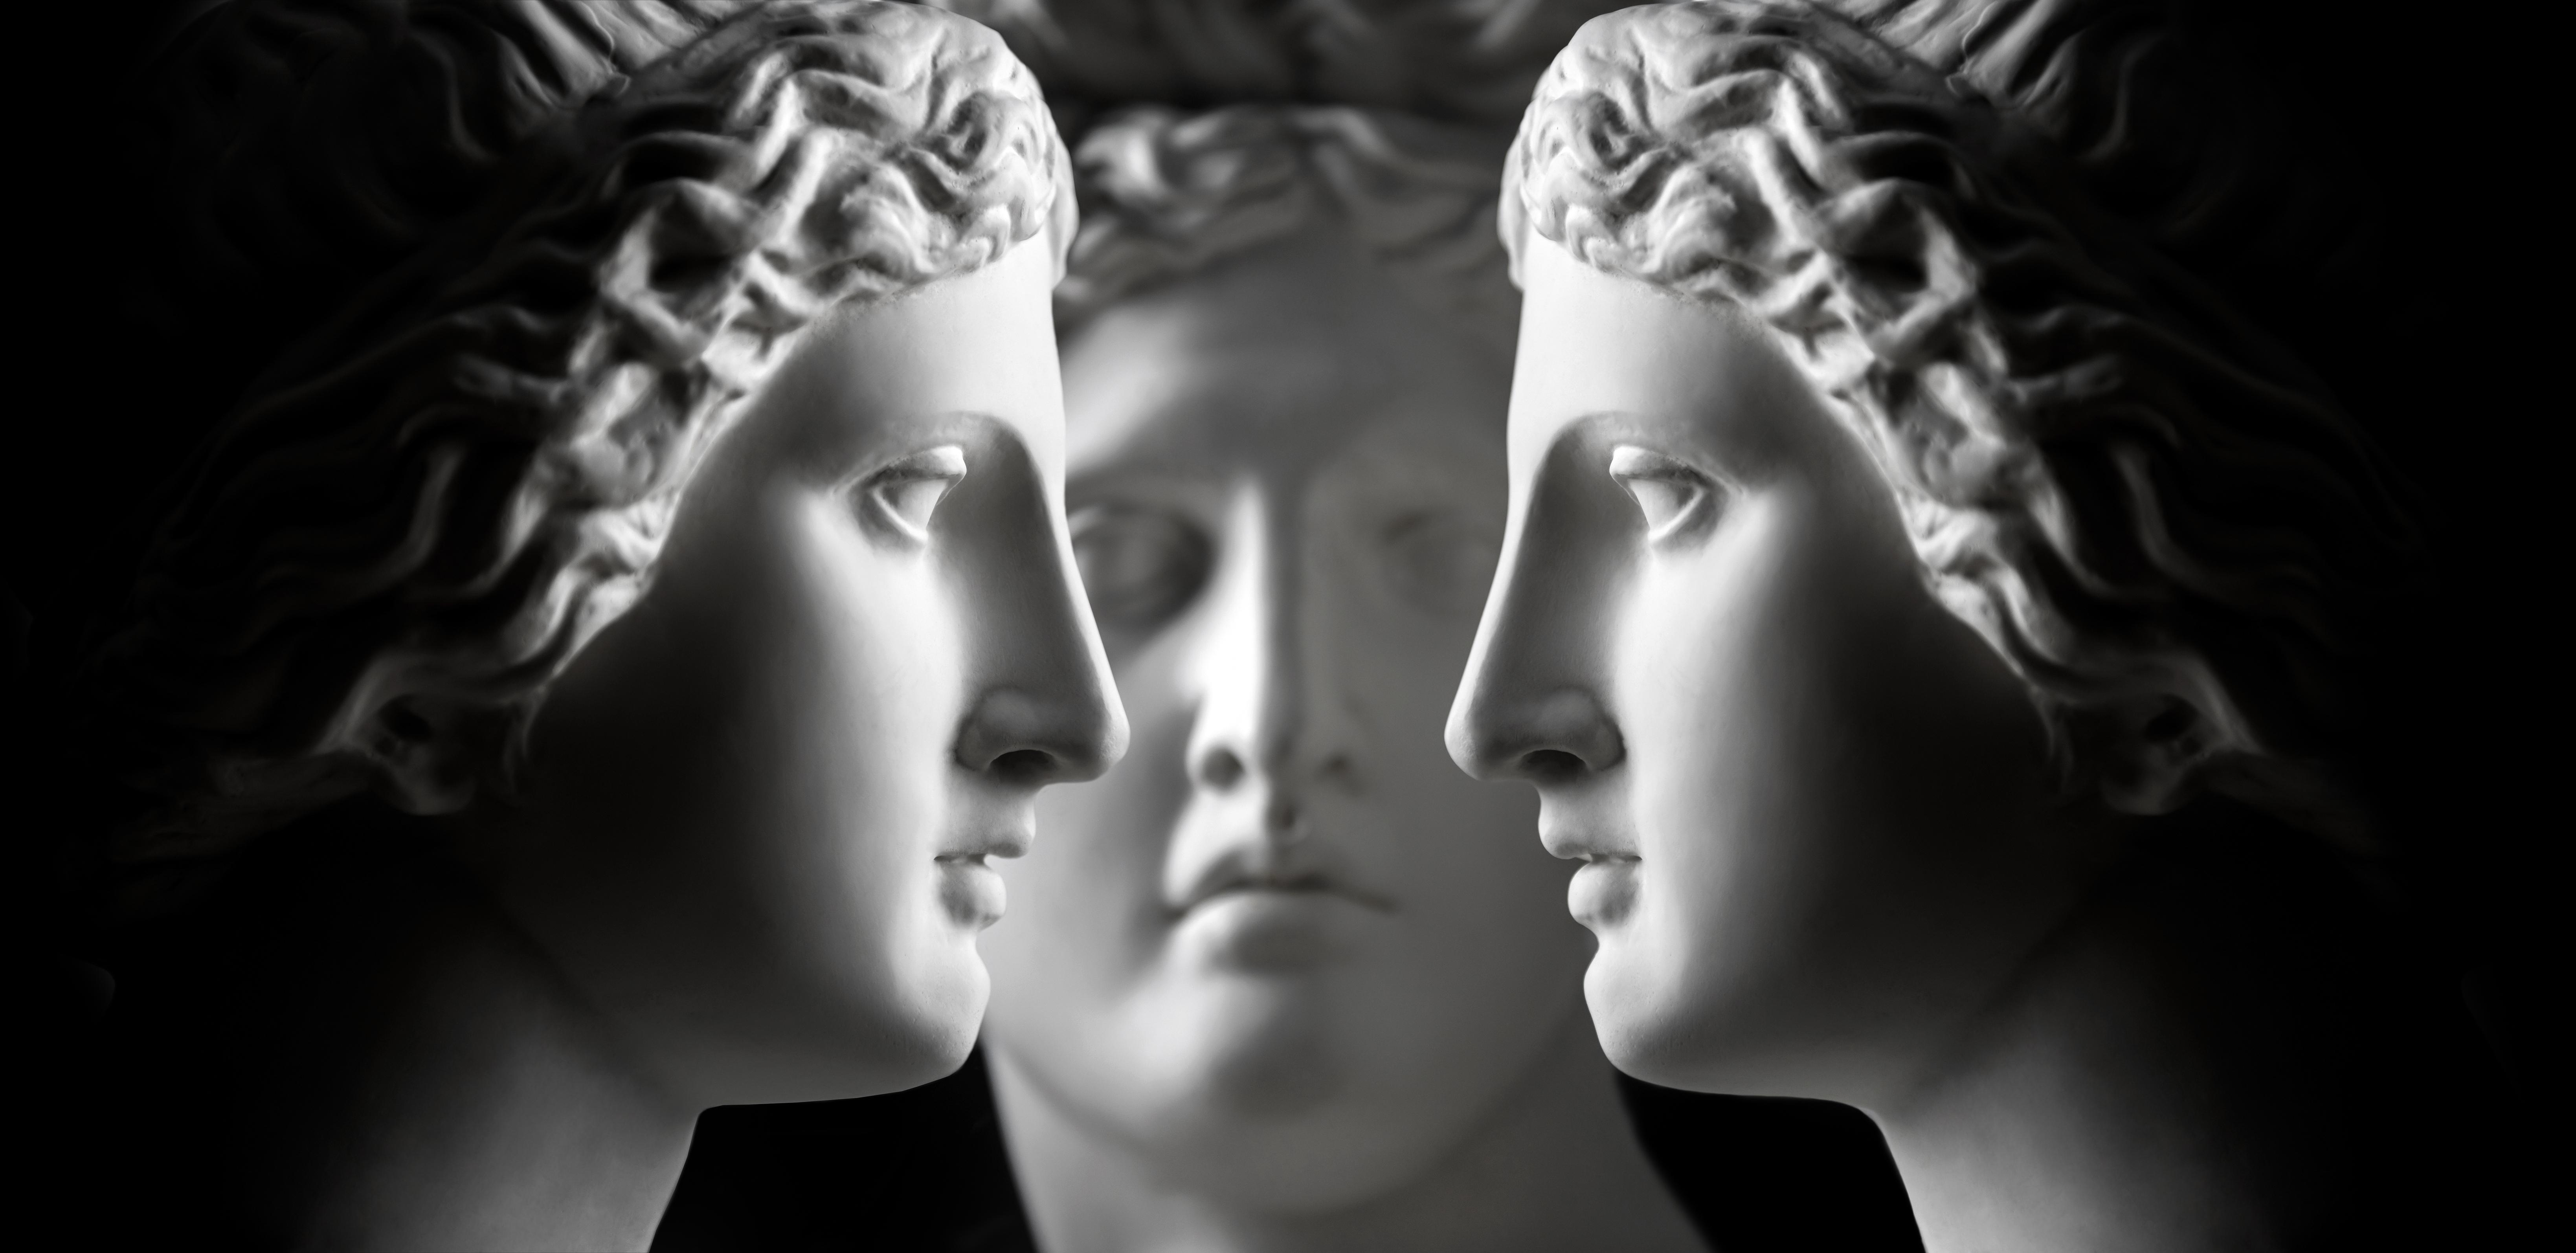 Three marble statue heads (two of Aphrodite and one of Apollo) face each other